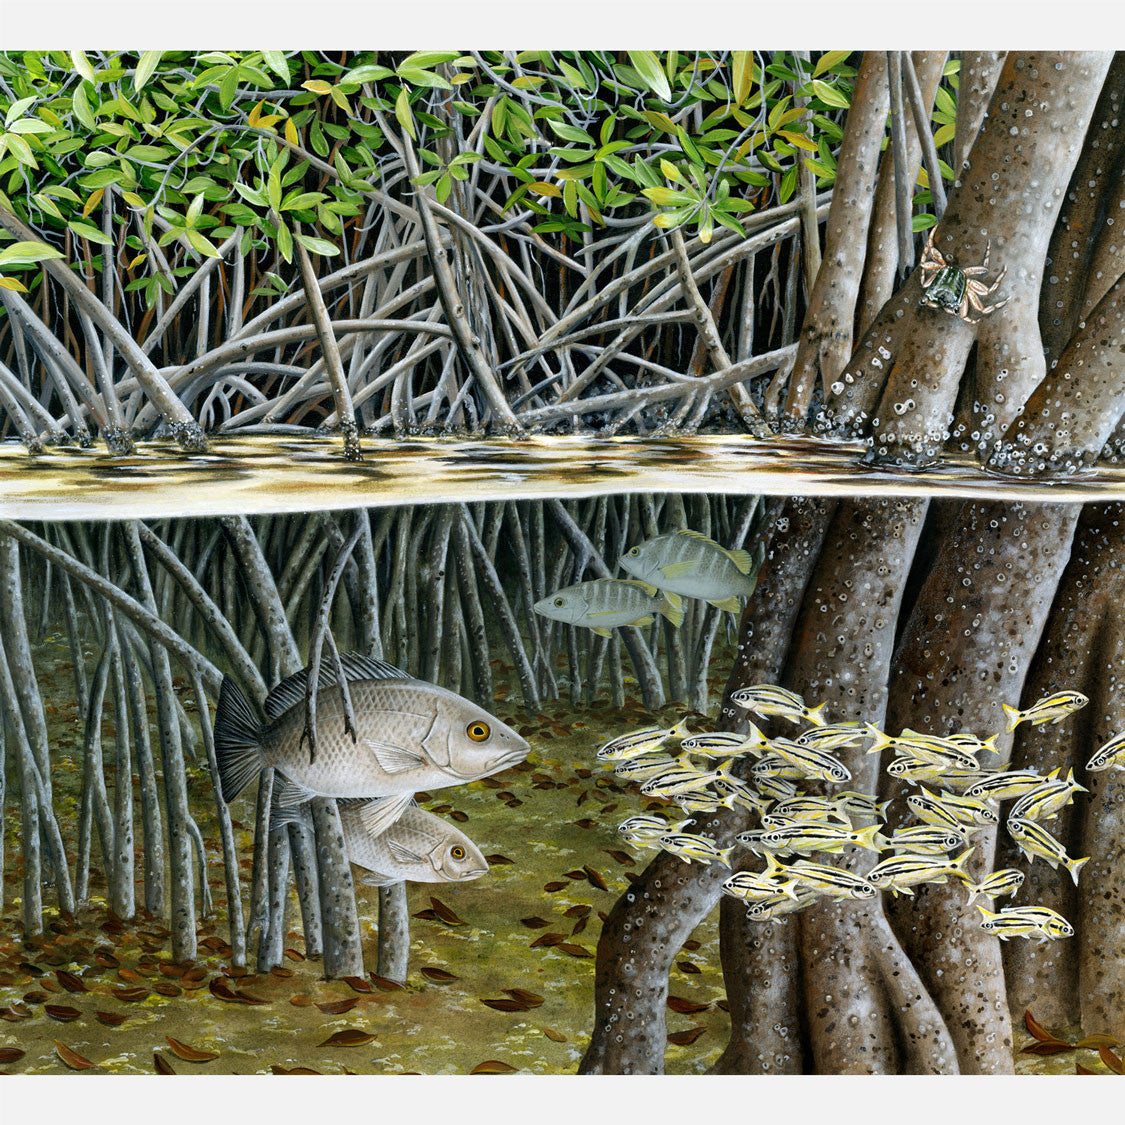 This beautiful, highly detailed illustration is of various Florida fish species amongst red mangrove, Rhizophora mangles, prop roots. 